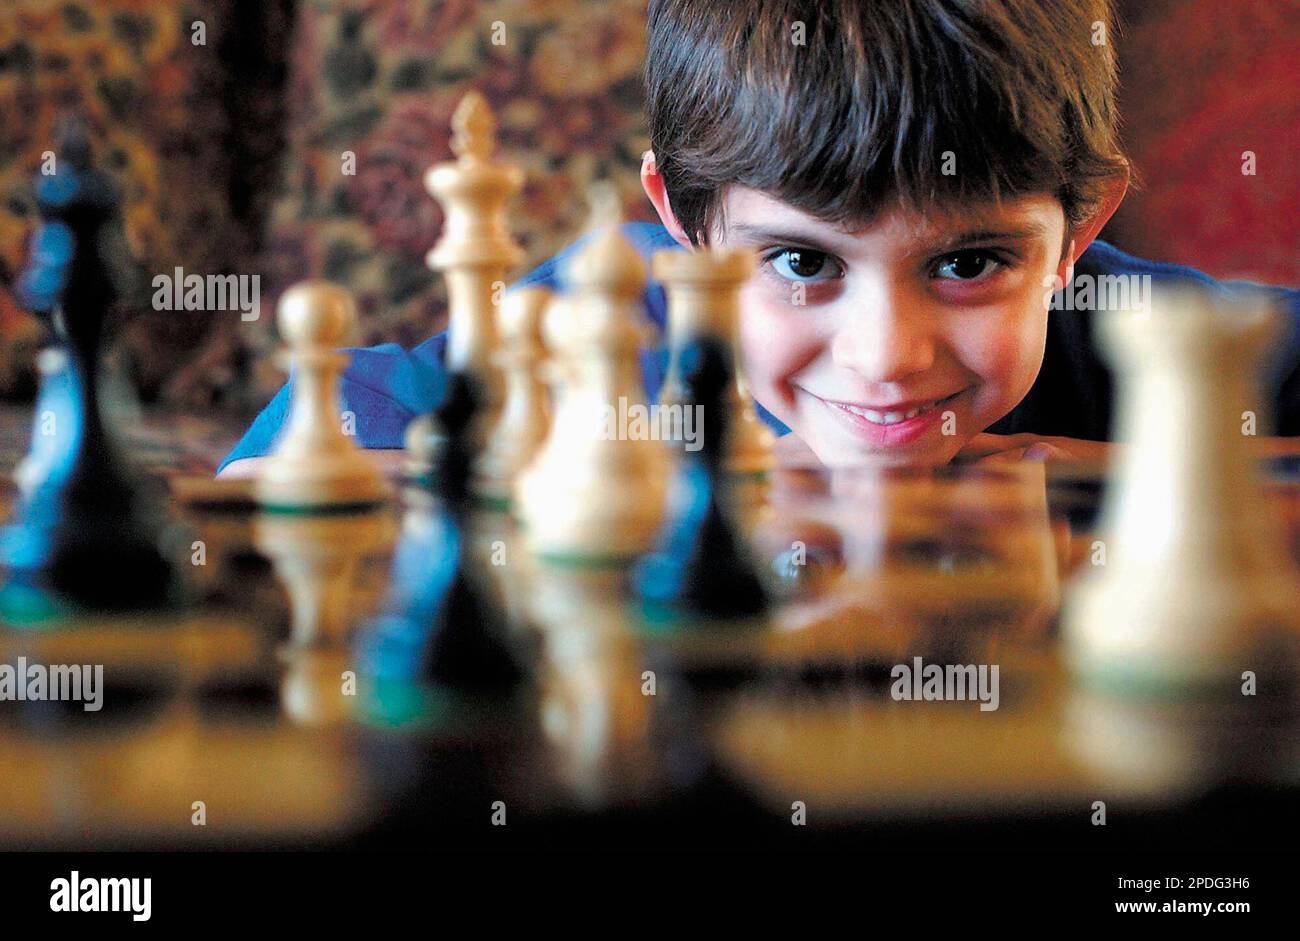 https://c8.alamy.com/comp/2PDG3H6/six-year-old-ian-gilchrist-is-seen-dec-21-2005-behind-a-chess-board-at-his-home-in-marion-ill-gilchrist-won-a-scholastic-chess-tournament-earlier-this-month-sponsored-by-the-us-chess-federation-that-earned-him-a-share-of-the-title-of-top-kindergarten-player-he-is-now-getting-ready-to-compete-in-the-world-championships-in-turkey-ap-photothe-southern-steve-jahnke-2PDG3H6.jpg